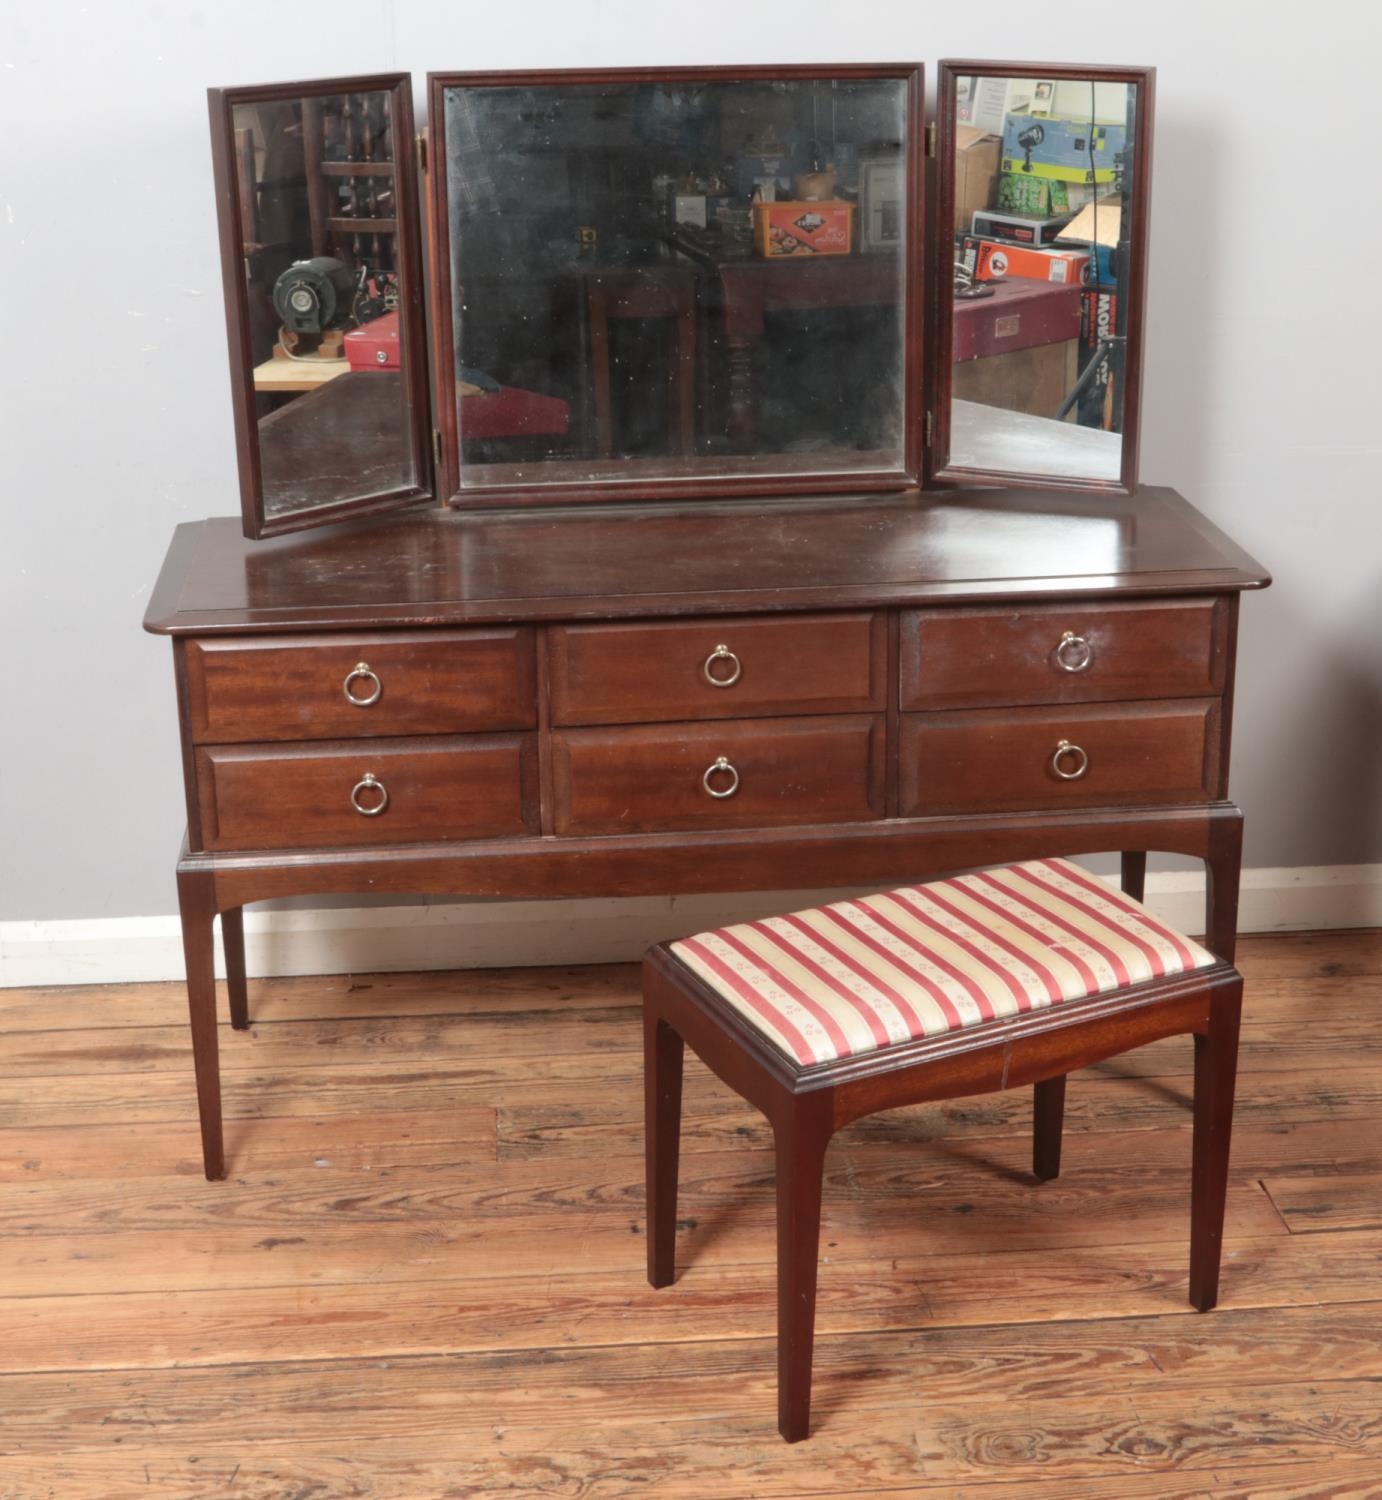 A Stag Minstrel dressing table and stool.